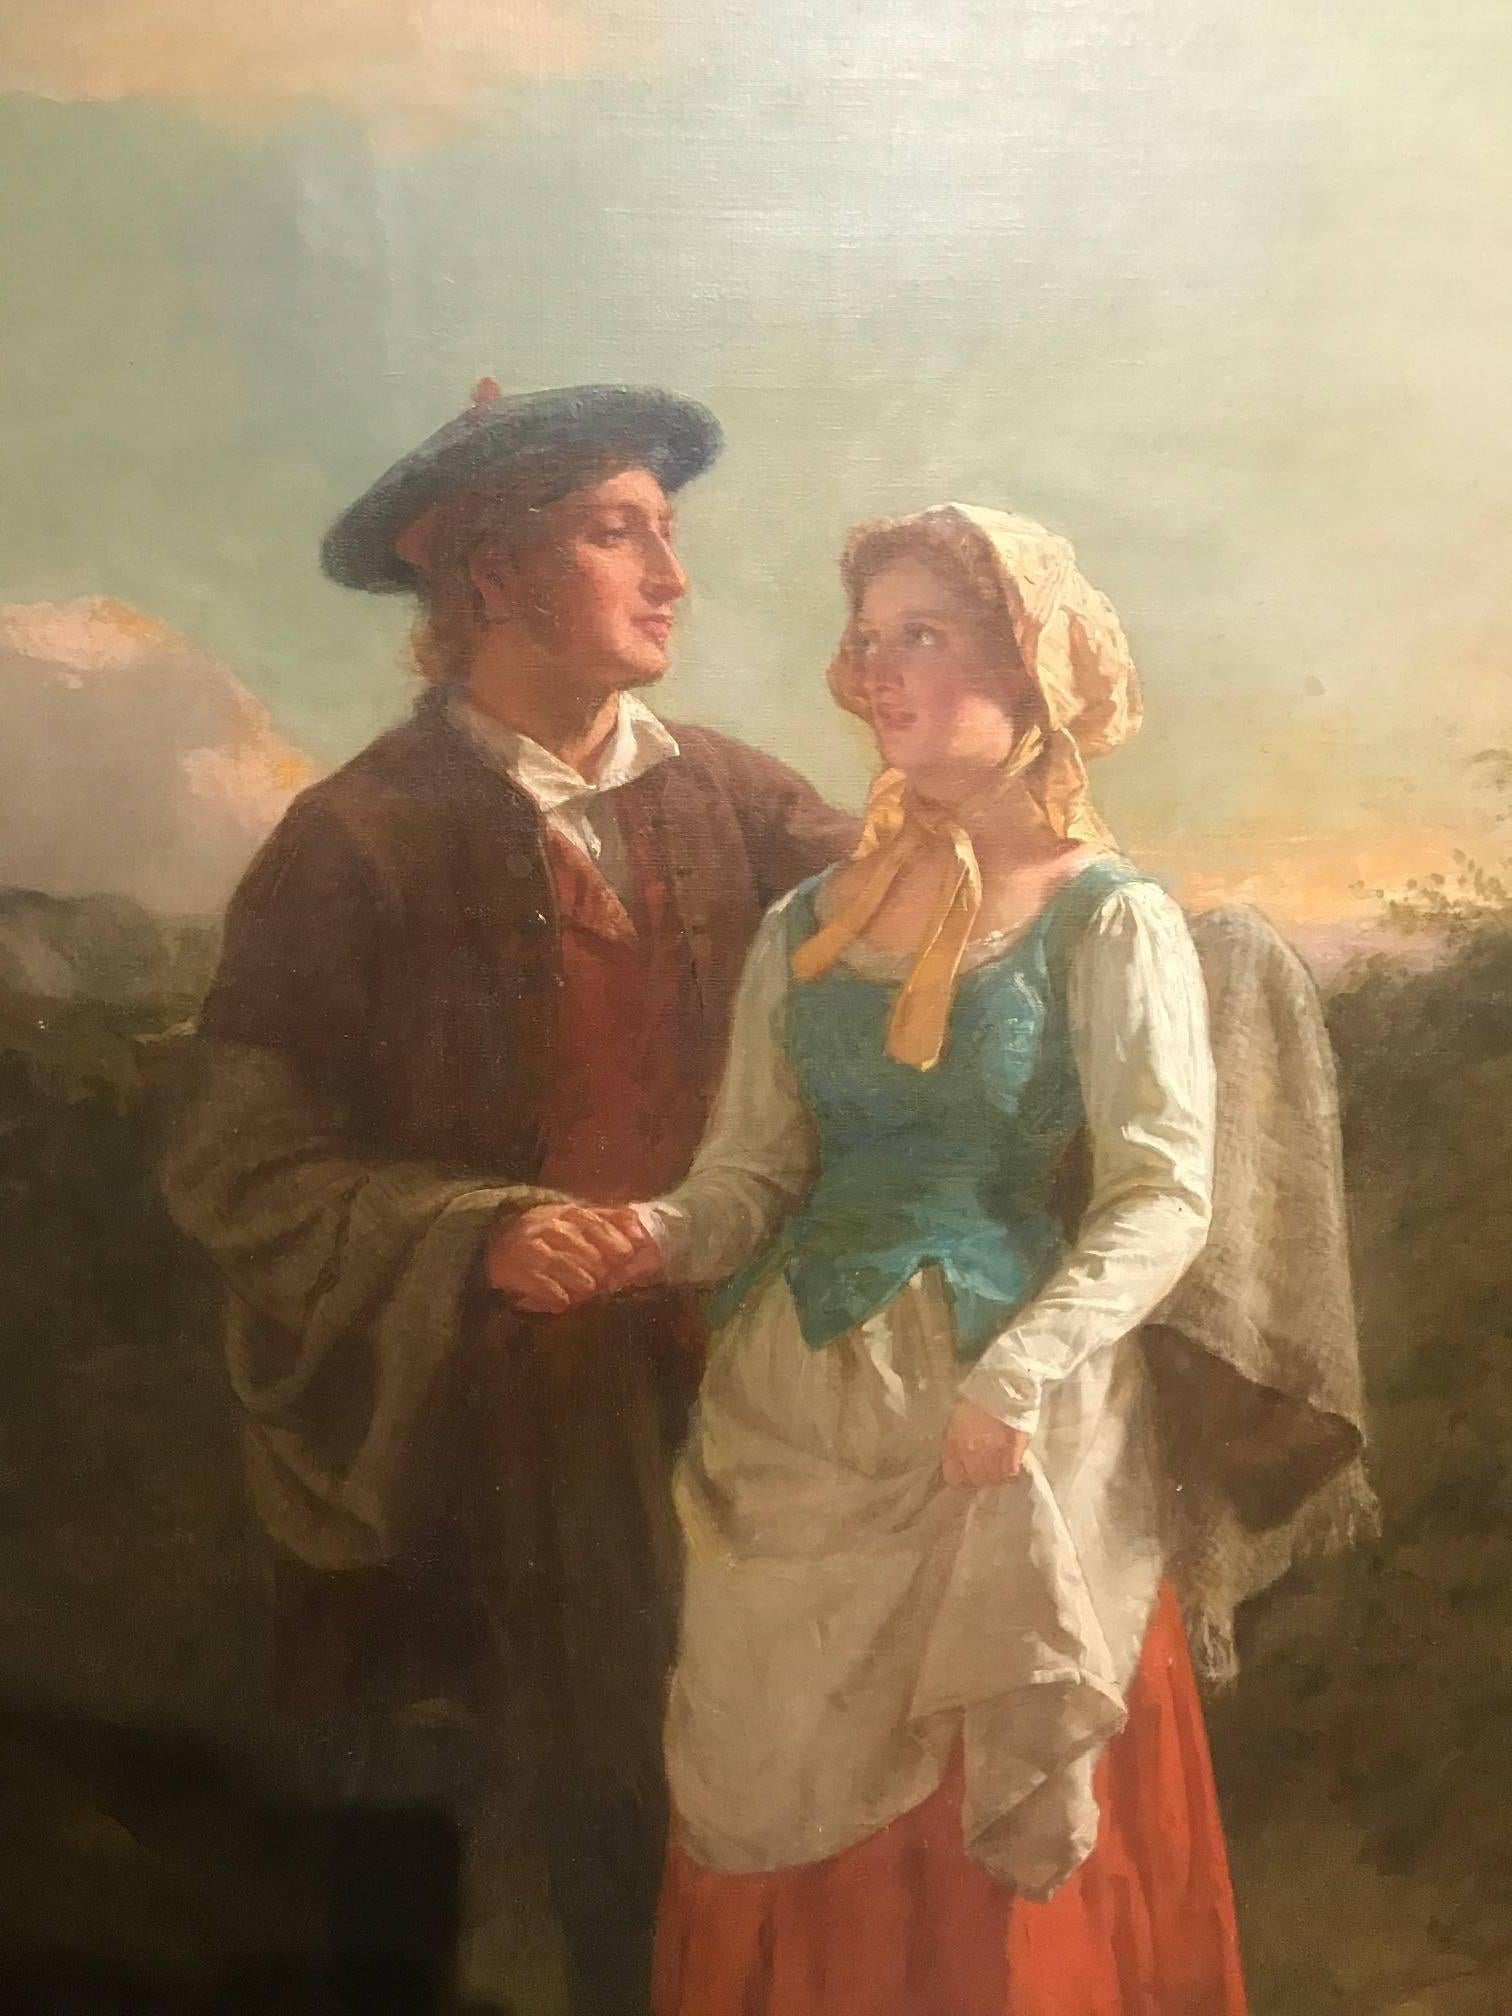 Hugh Cameron (1835-1918) notable oil on canvas portrait and landscape painting depicting a young lad and lass, signed lower right Hugh Cameron.

Artist listed in Benezit.

British, 19th–20th century, male.

Active in Edinburgh.

Born 1835,